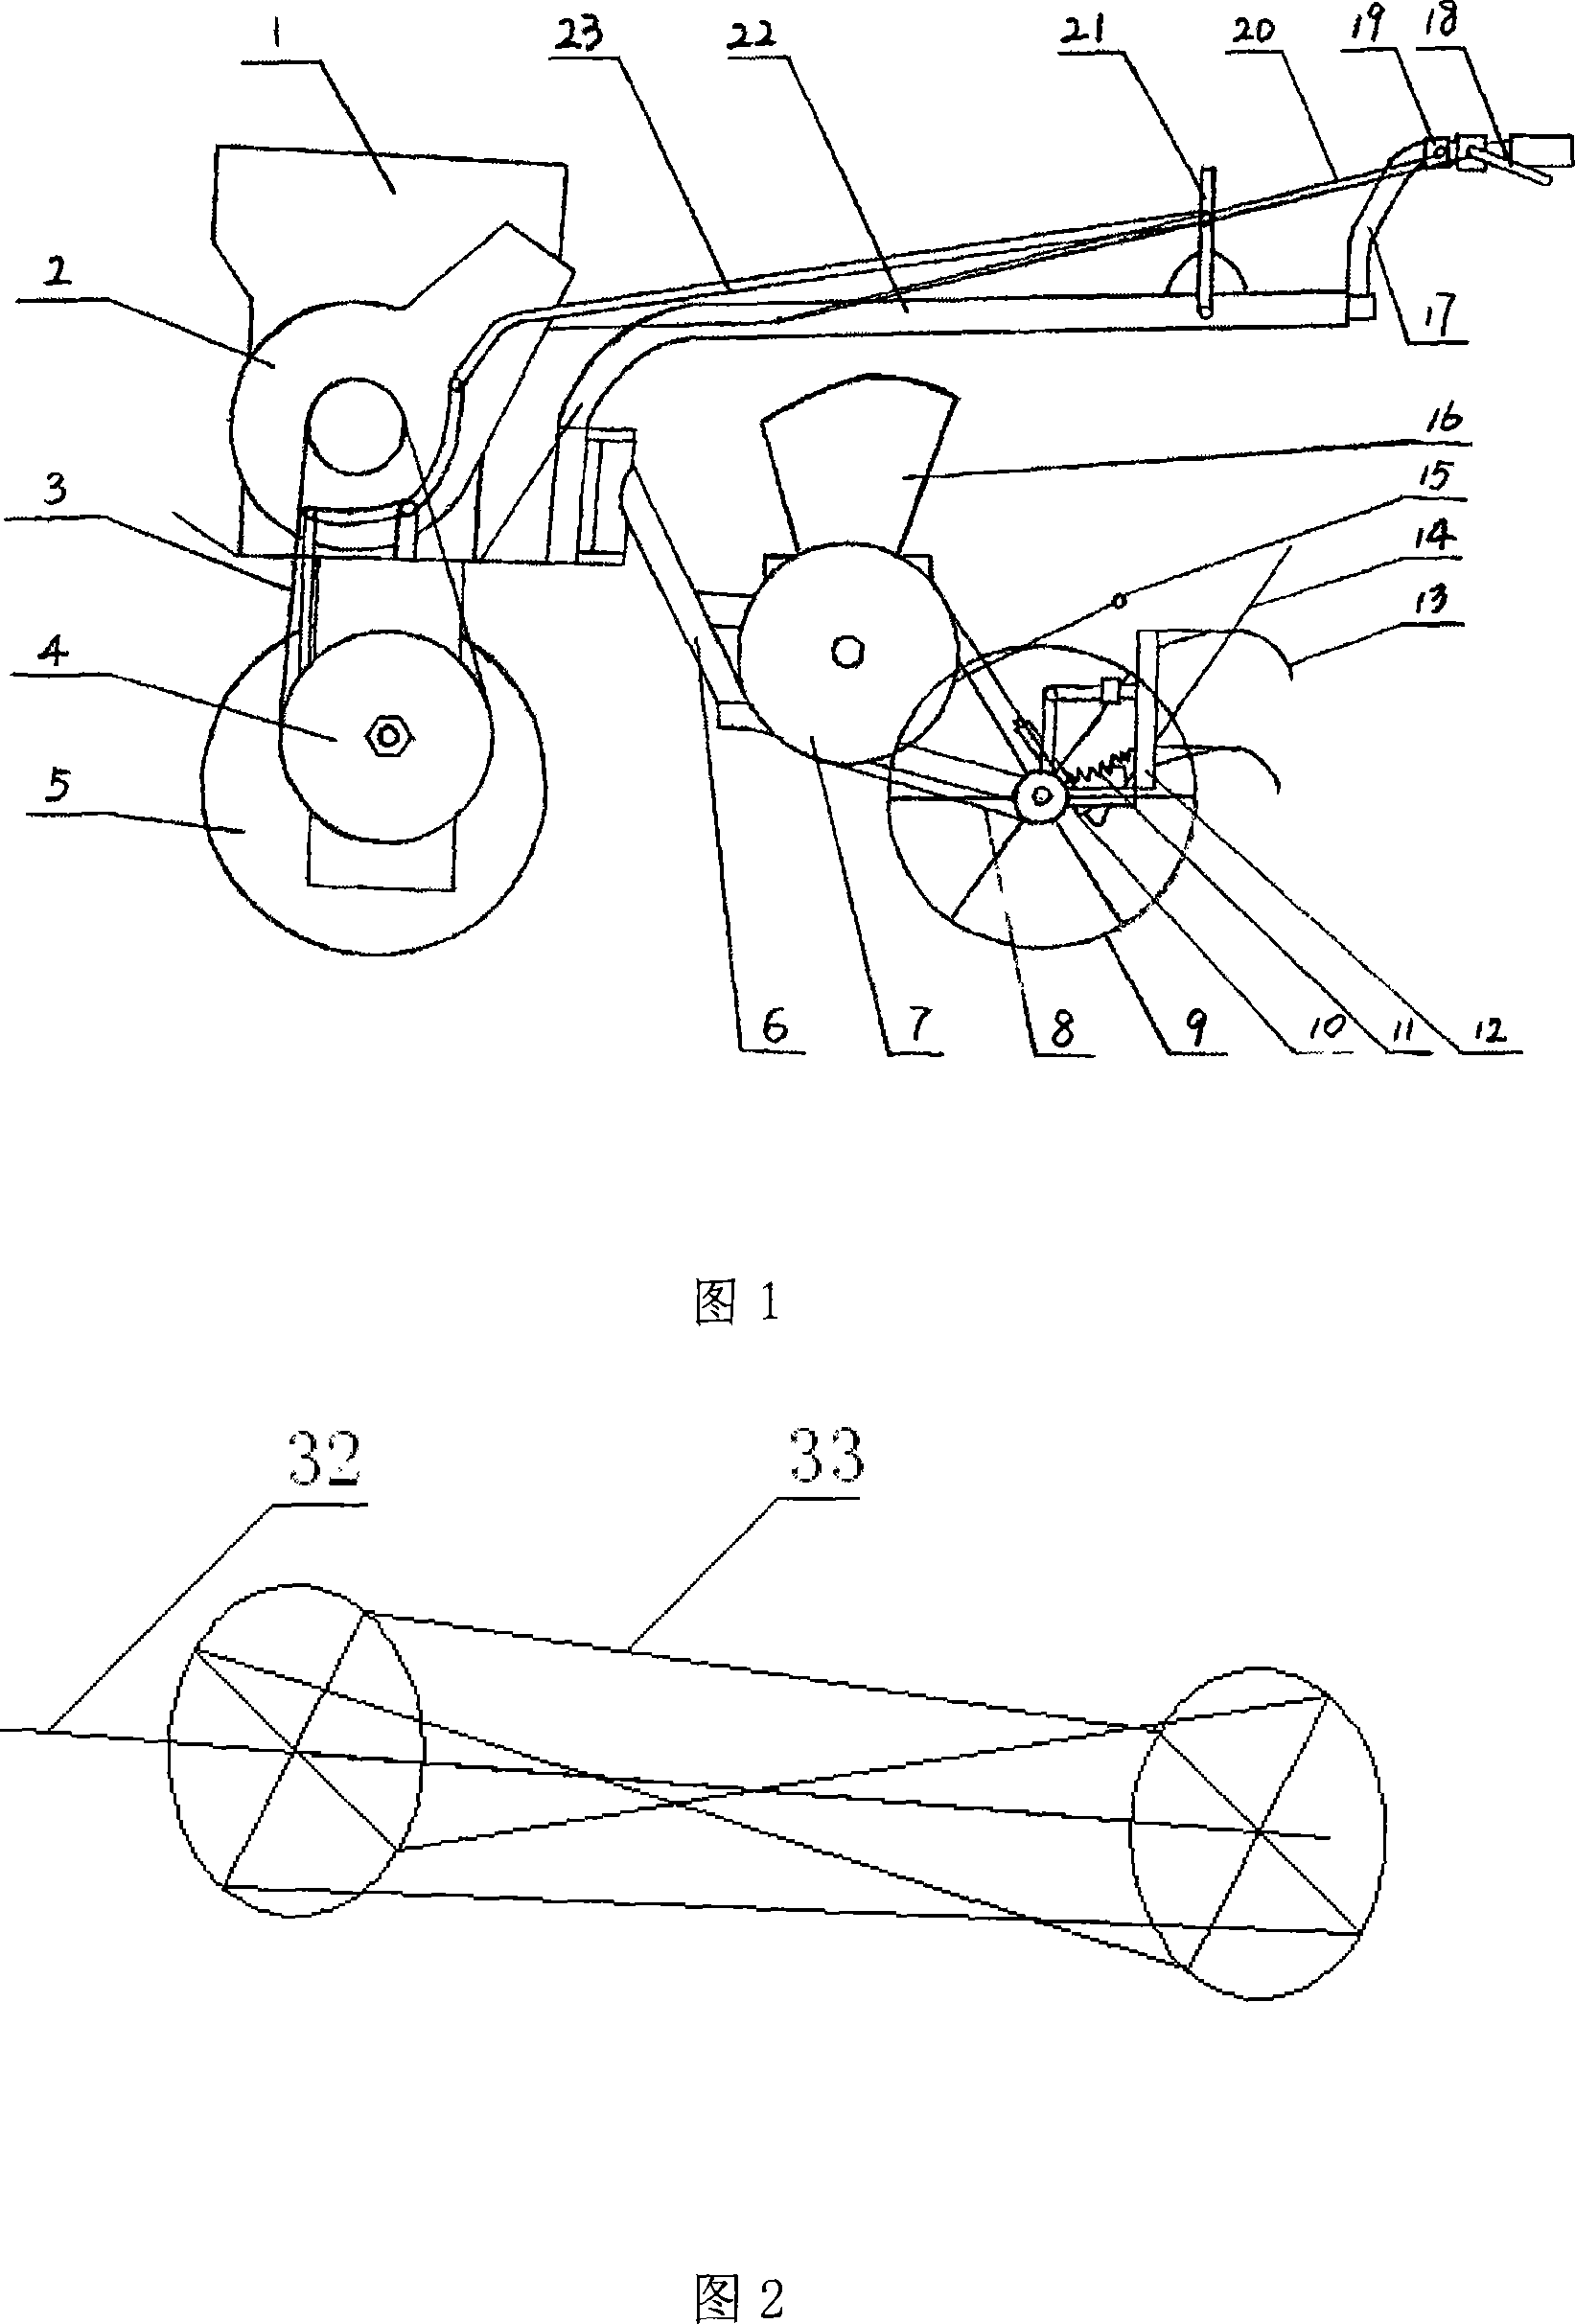 Tilling and seeding machine